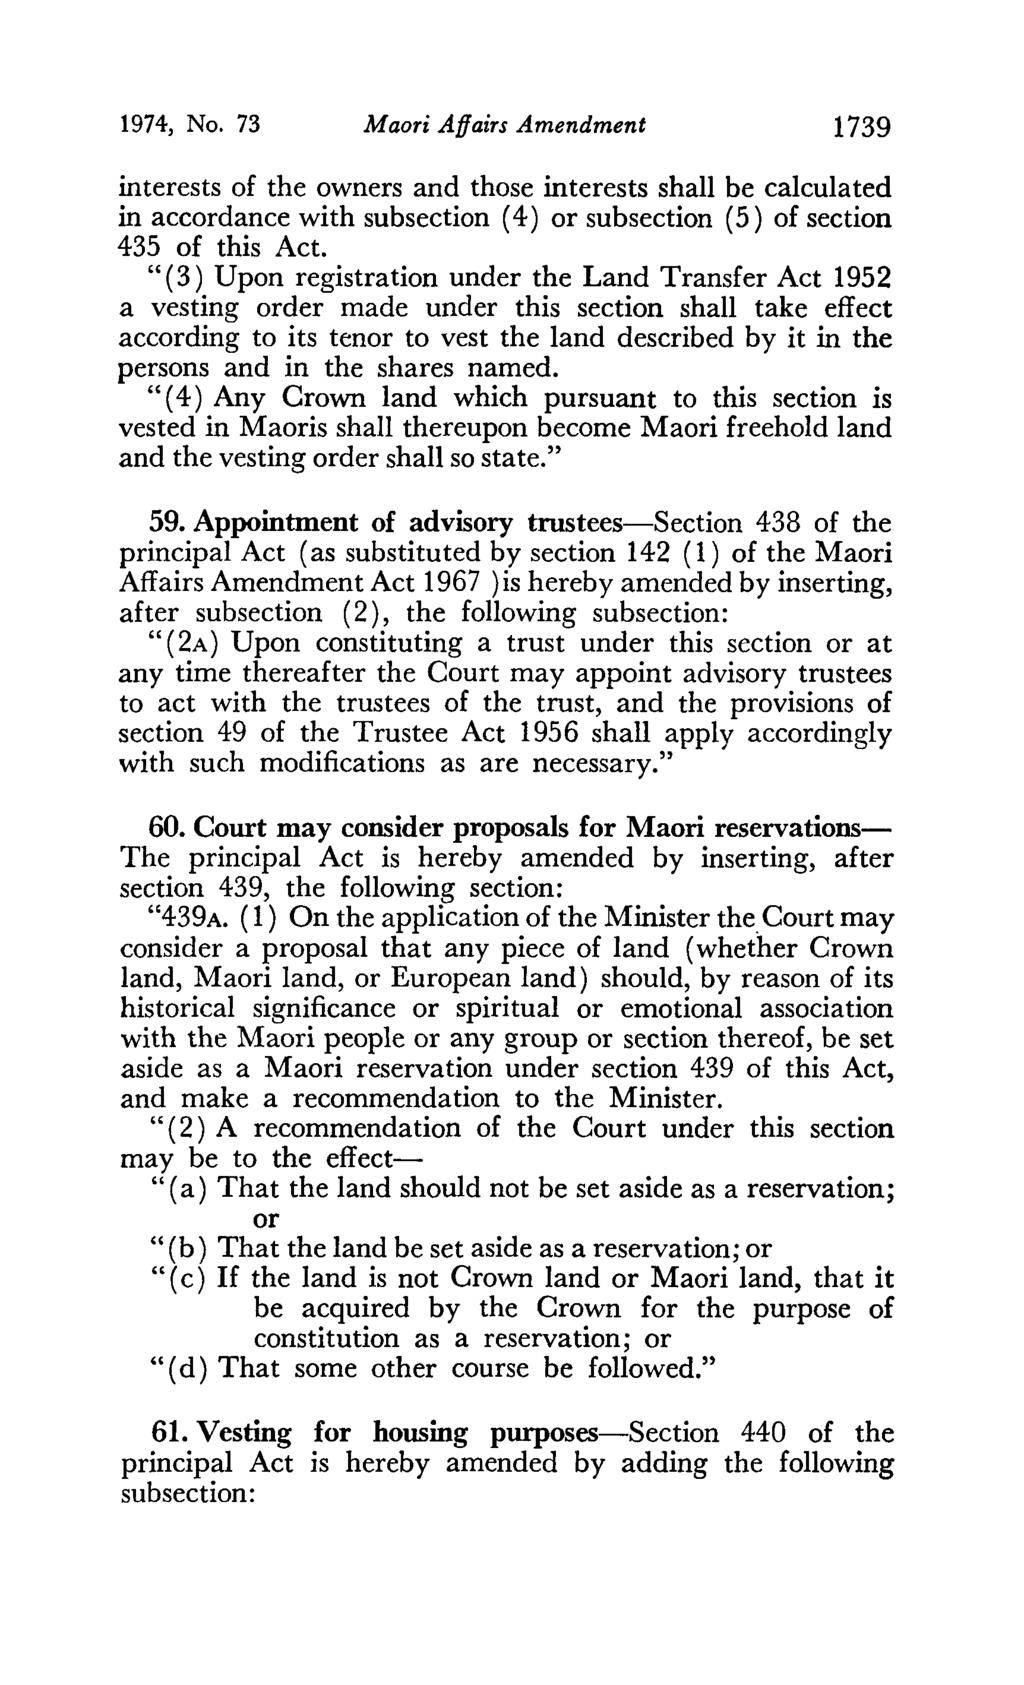 1974, No. 73 Maori Affairs Amendment 1739 interests of the owners and those interests shall be calculated in accordance with subsection (4) or subsection (5) of section 435 of this Act.